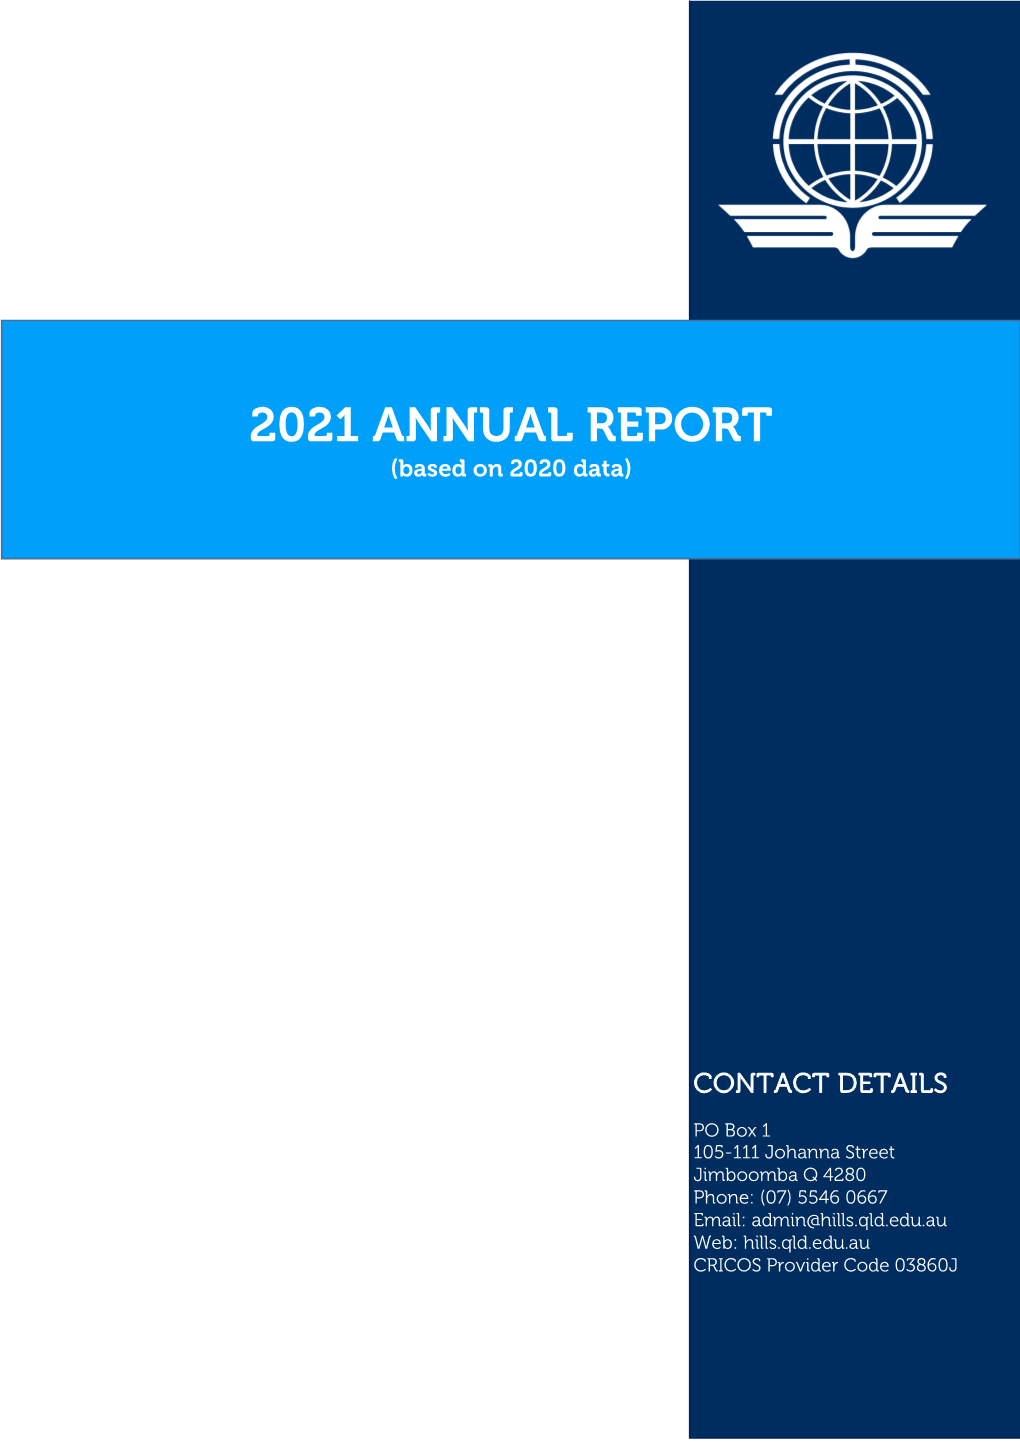 2021 Annual School Report - Created by Jodie Gilliam – June 2021 2